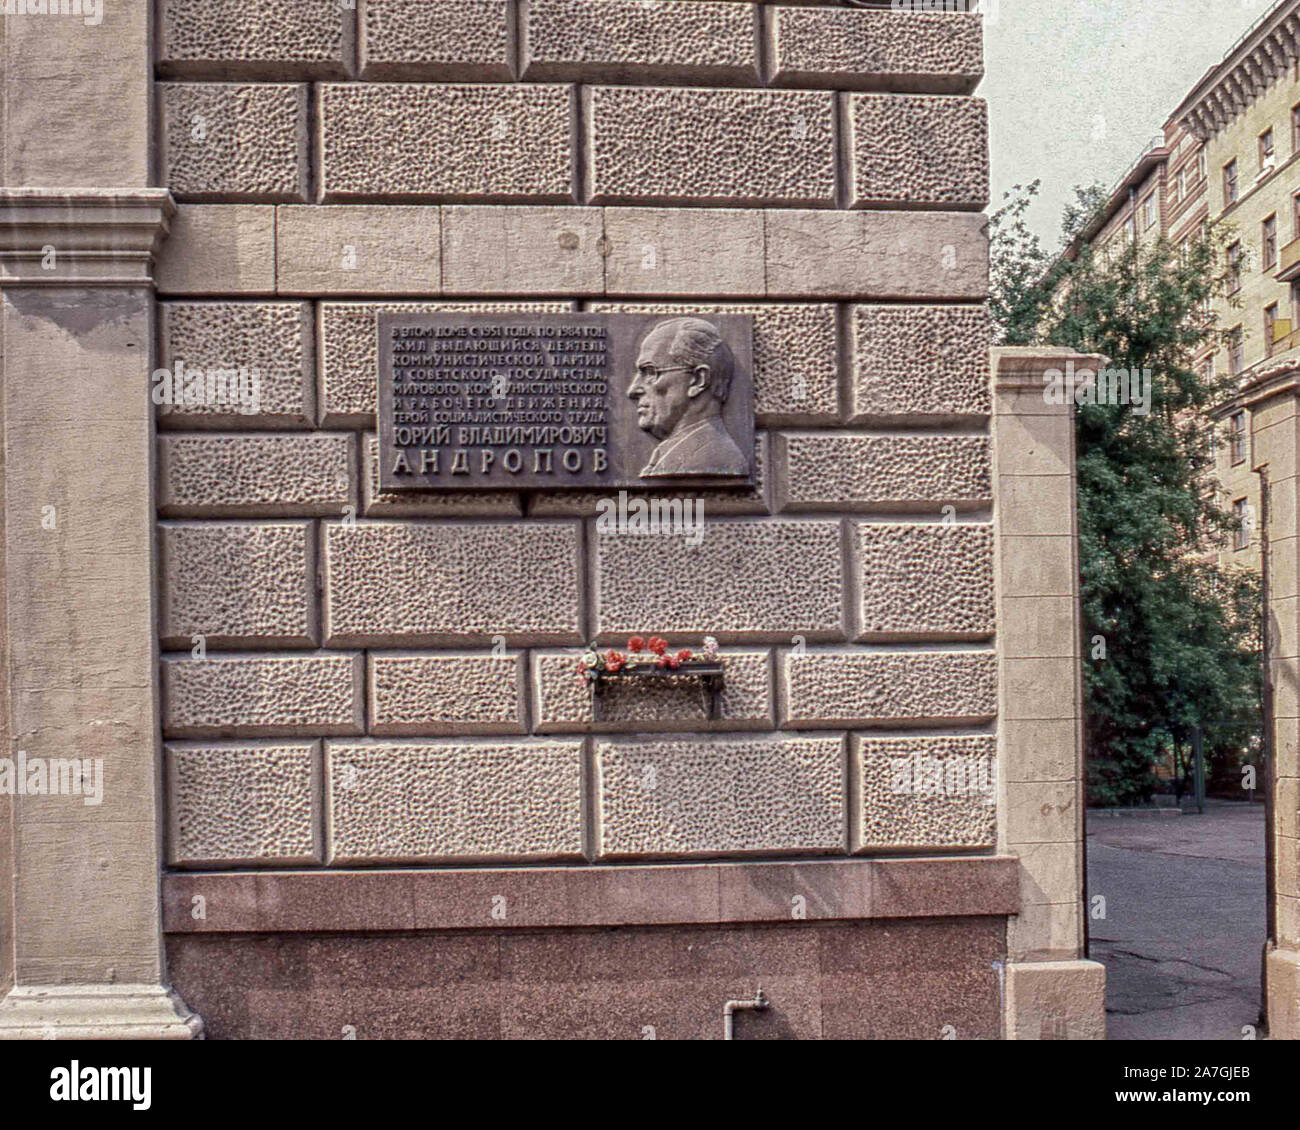 Moscow, Russia. 1st Feb, 1989. A commemorative plaque and a shelf of flowers, on the wall of a stately Moscow apartment building at 26 Kutuzovsky Prospect, (where he and other Soviet leaders lived) honors Yuri V. Andropov. A former head of the KGB, he was General Secretary of the Communist Party of the Soviet Union from November 1982 until his death in February 1984. Credit: Arnold Drapkin/ZUMA Wire/Alamy Live News Stock Photo